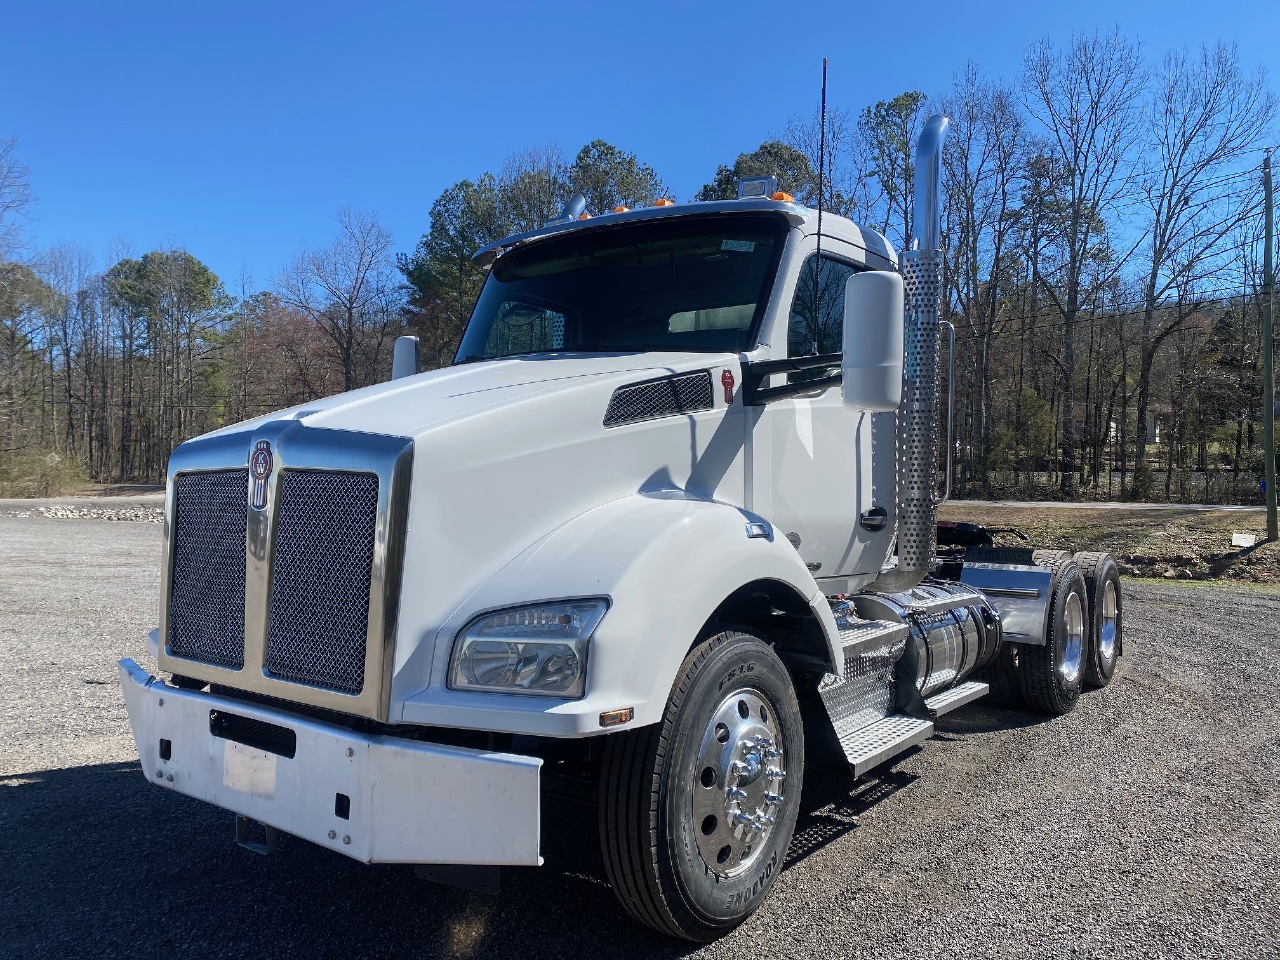 USED 2019 KENWORTH T880 TANDEM AXLE DAYCAB TRUCK #15228